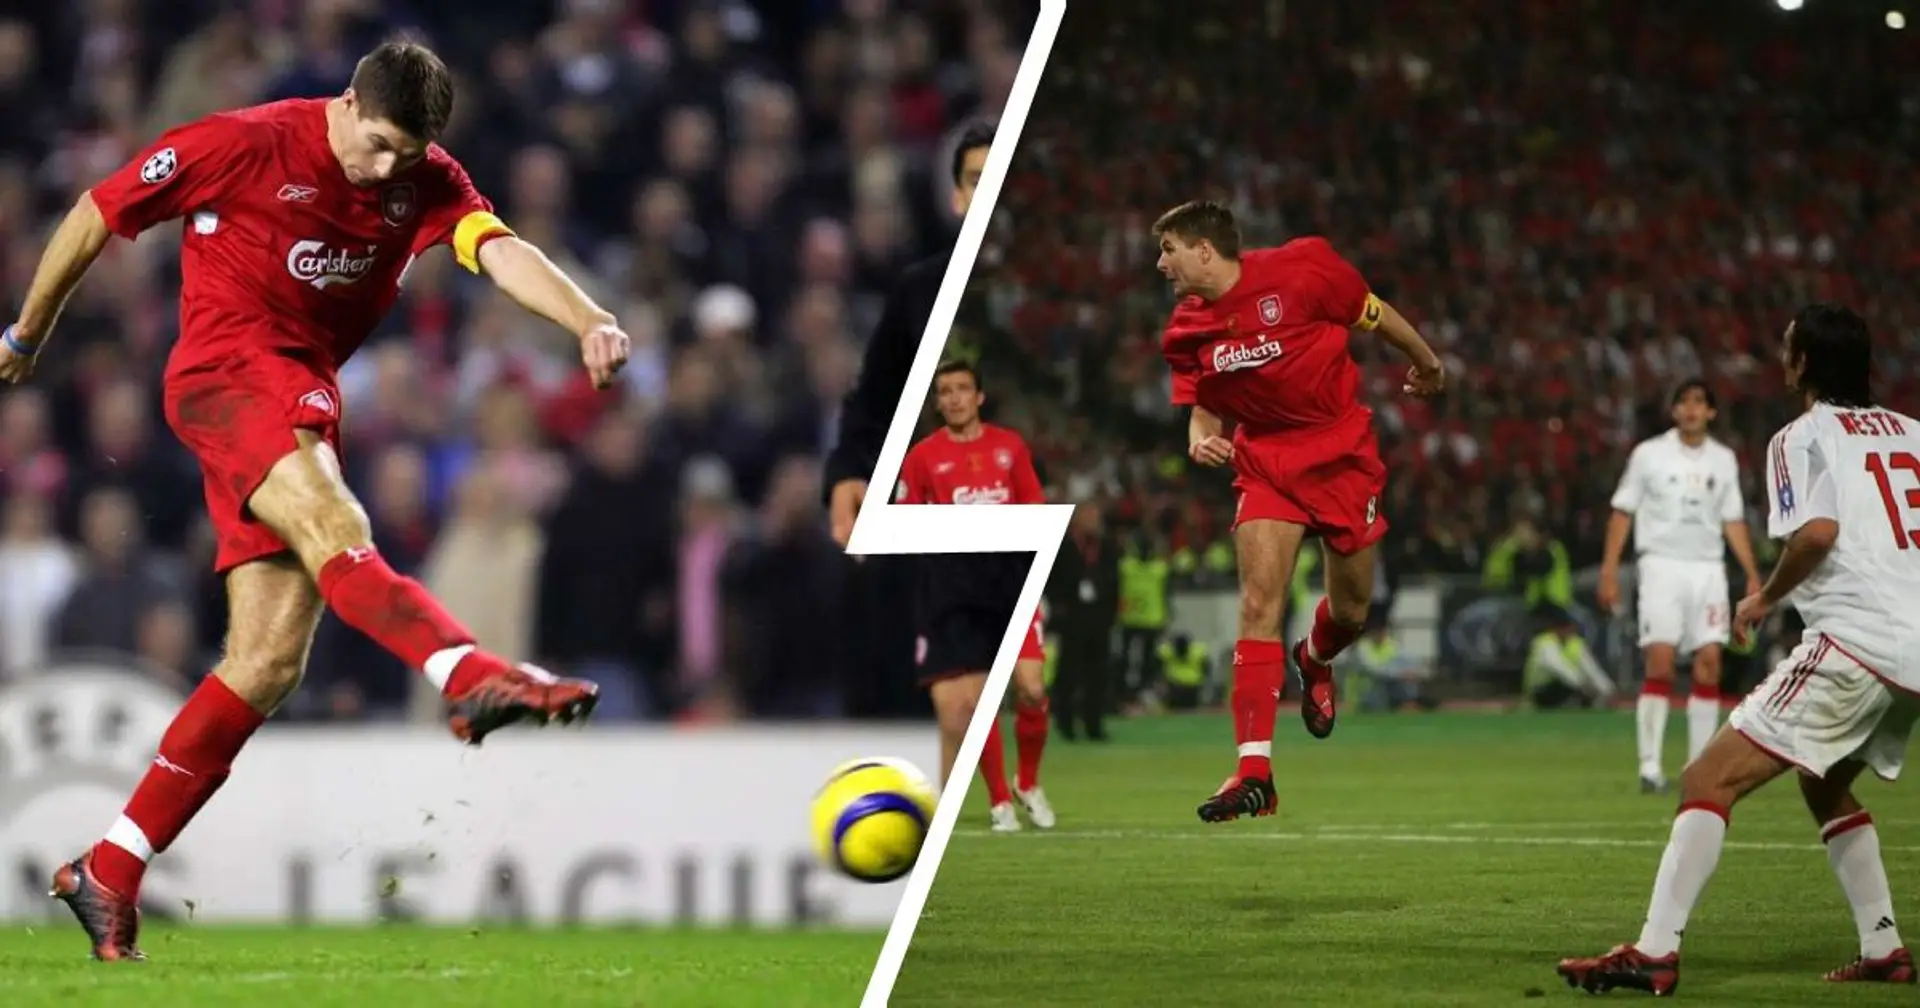 Header vs Milan, screamer vs Olympiakos and more - relive some of Steven Gerrard's greatest UCL moments (video)